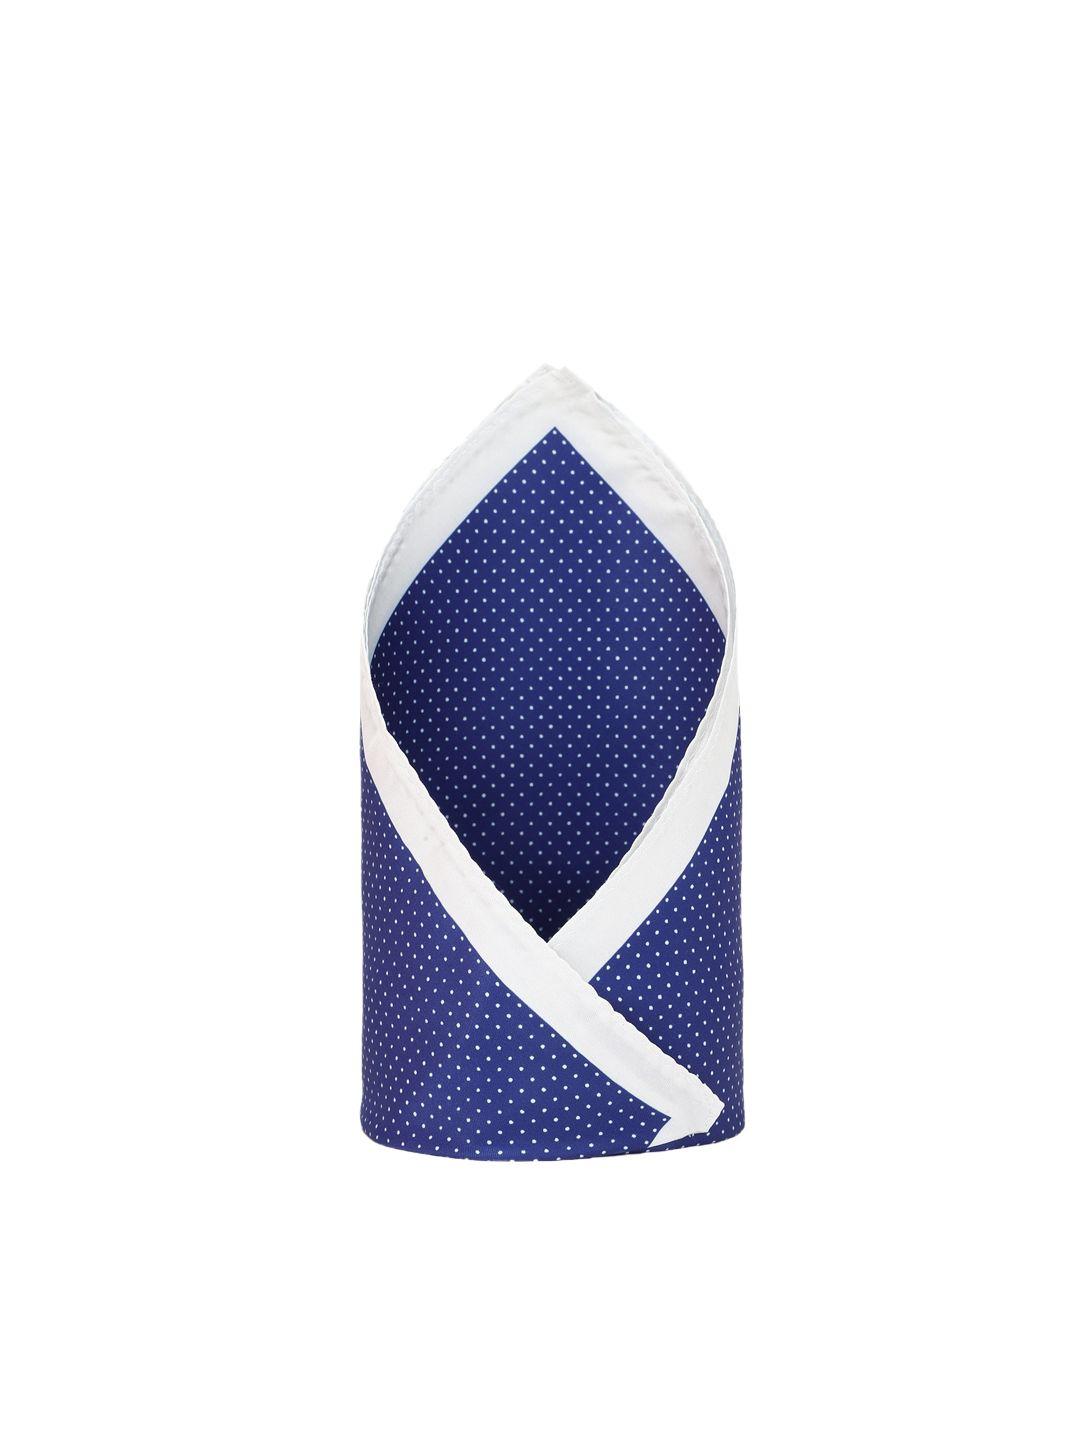 allen solly blue printed pocket square